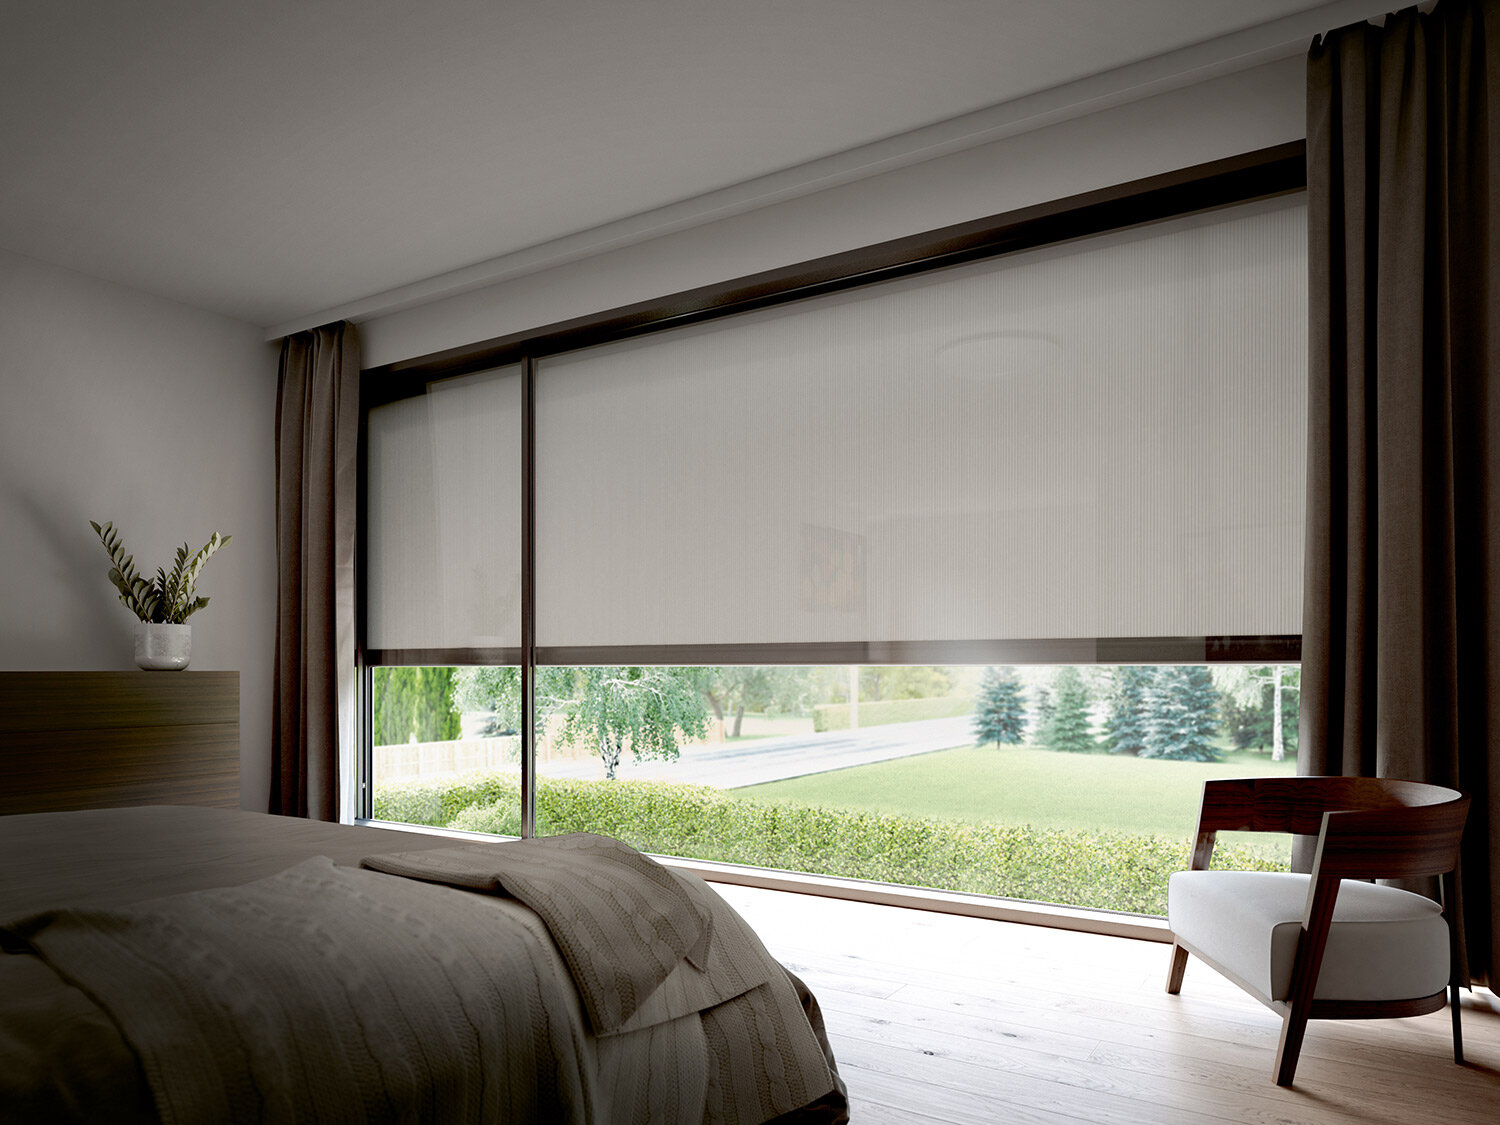 Motorised External Blinds Hampshire. Once solar rays make contact with the glass in windows heat is transferred. This can be alleviatetd by adding electric external blinds to stop the initial contact.